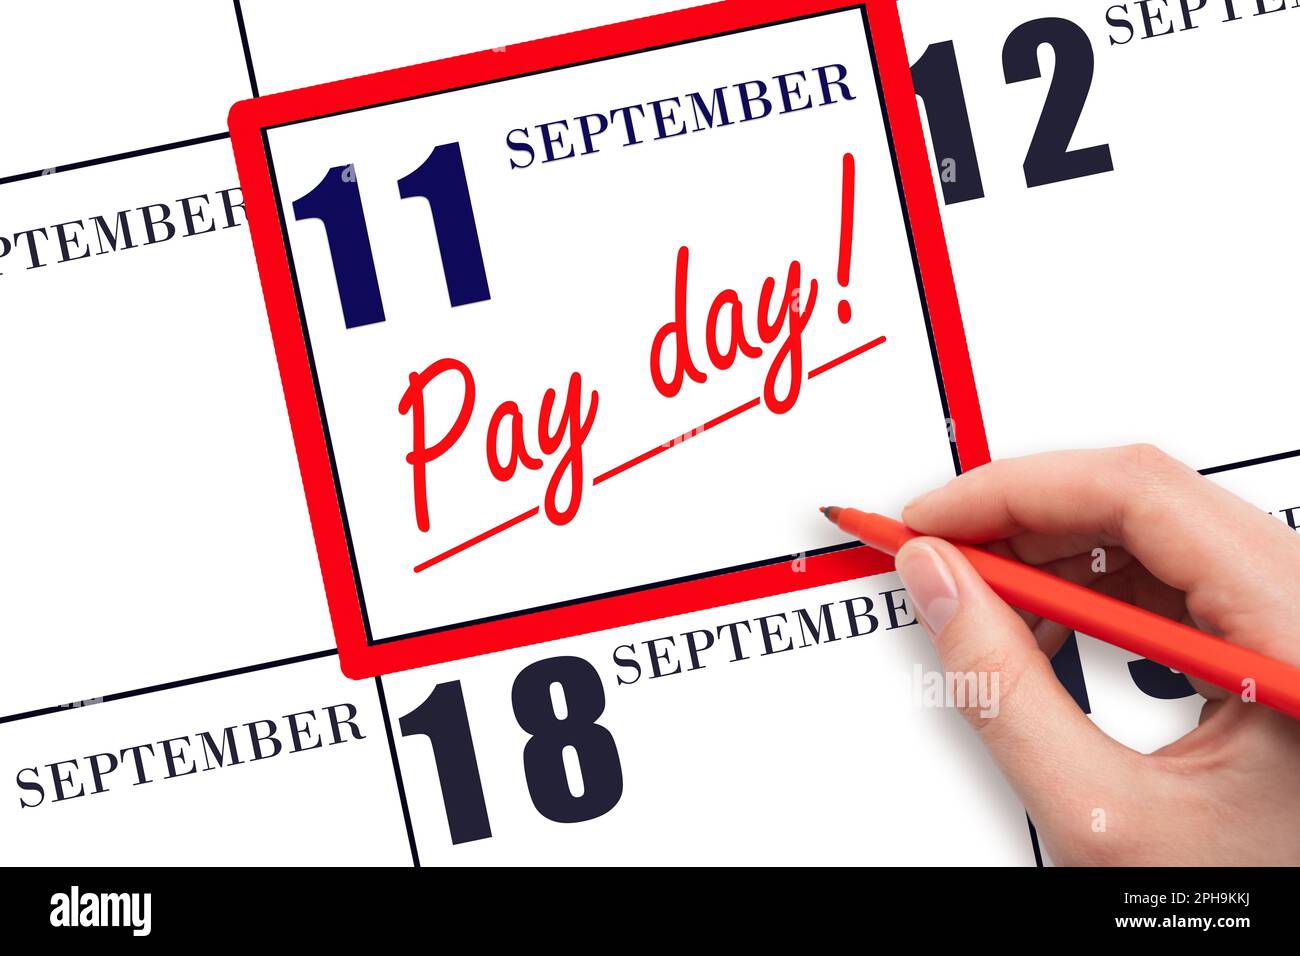 11th day of September. Hand writing text PAY DATE on calendar date September  11 and underline it. Payment due date.  Reminder concept of payment. Aut Stock Photo